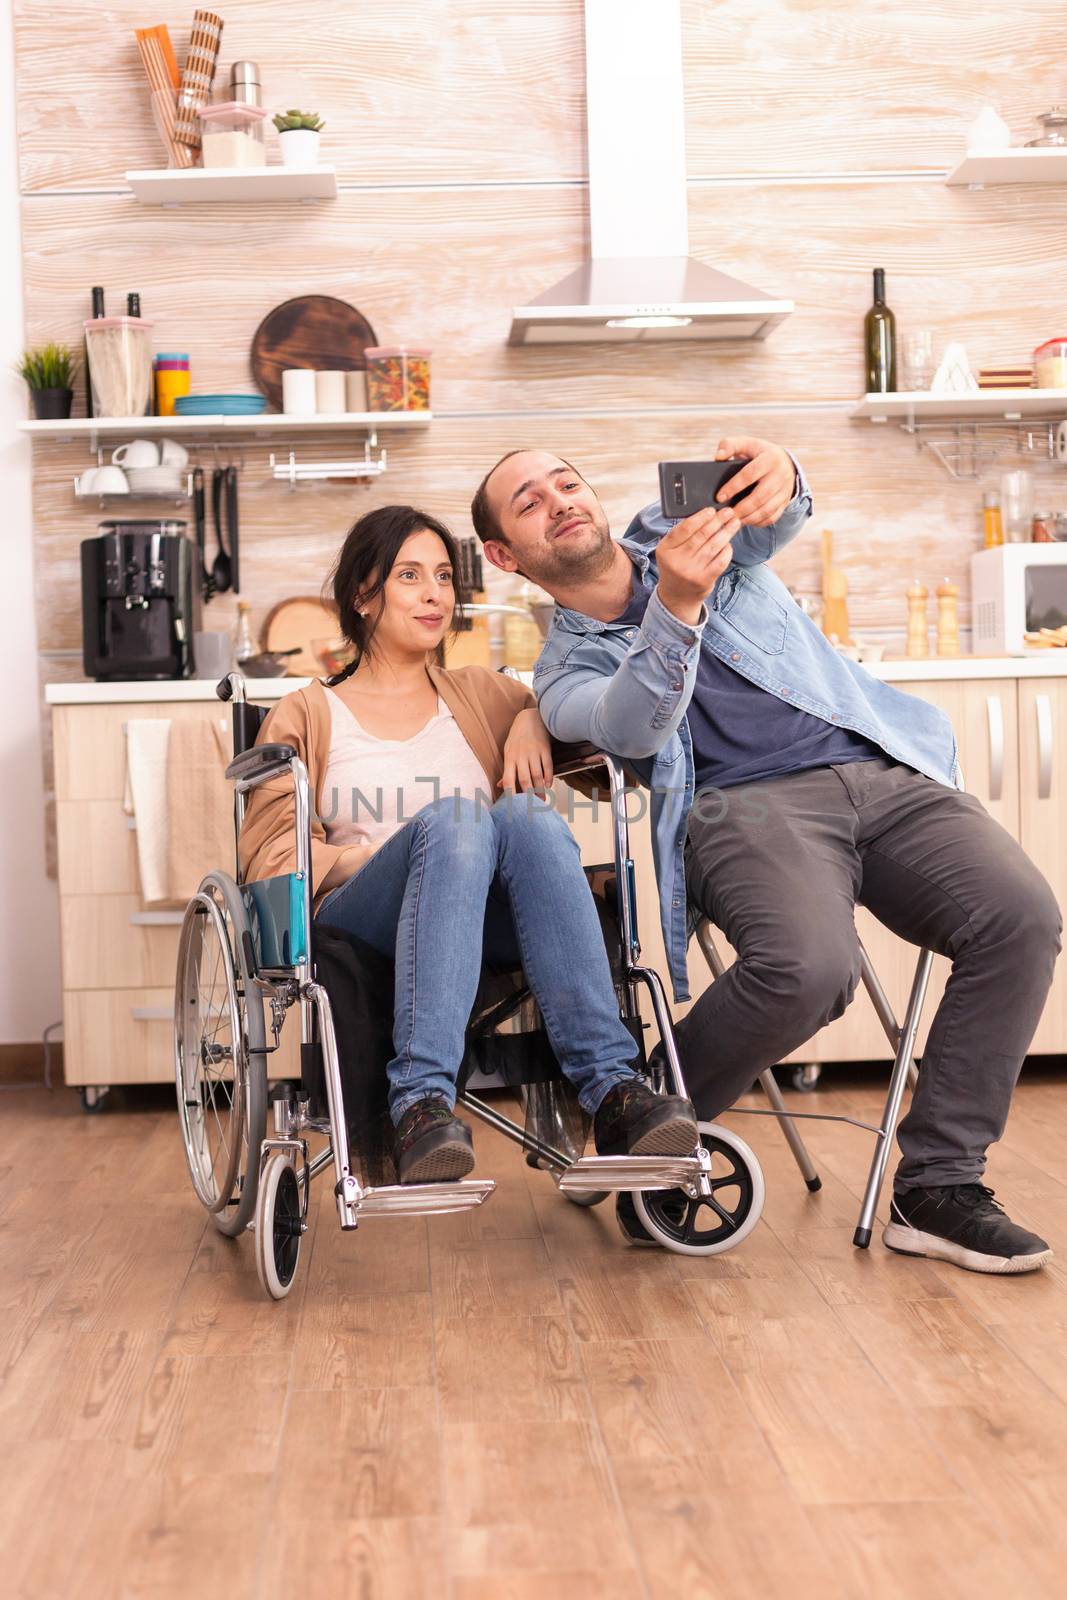 Romantic man taking selfie with disabled wife in wheelchair. Disabled paralyzed handicapped woman with walking disability integrating after an accident.